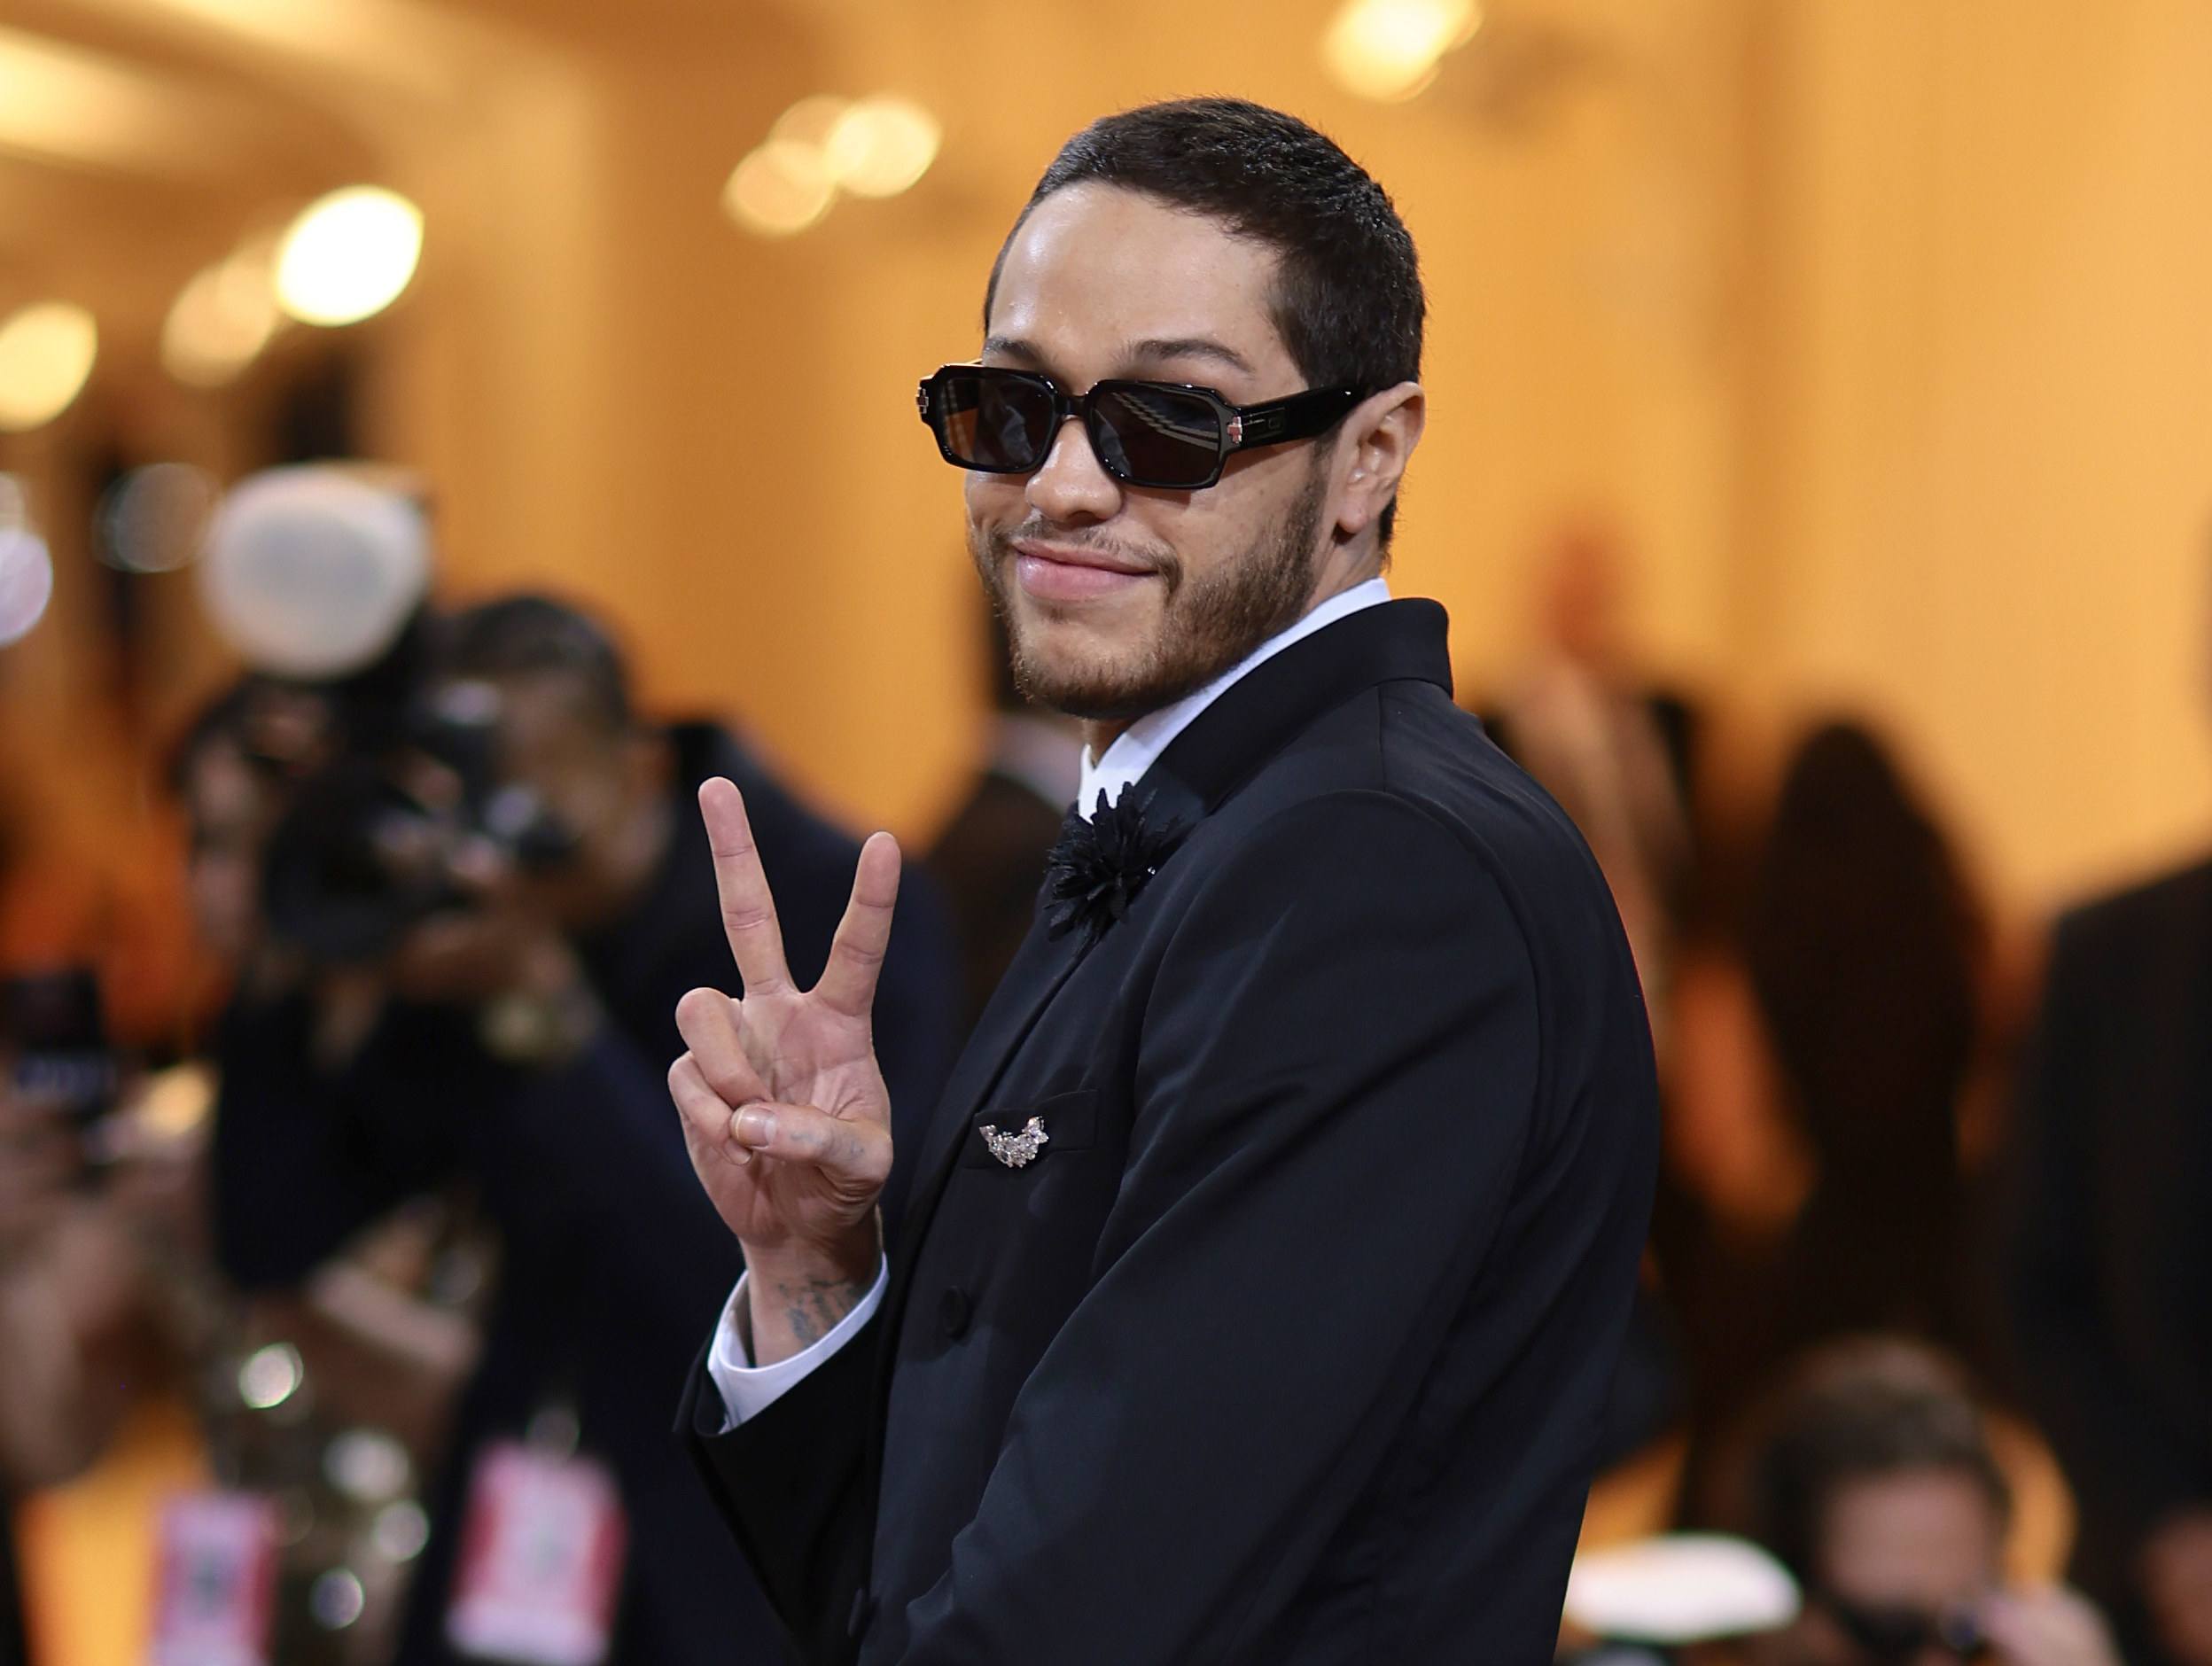 Pete Davidson making a peace sign a smiling at the camera